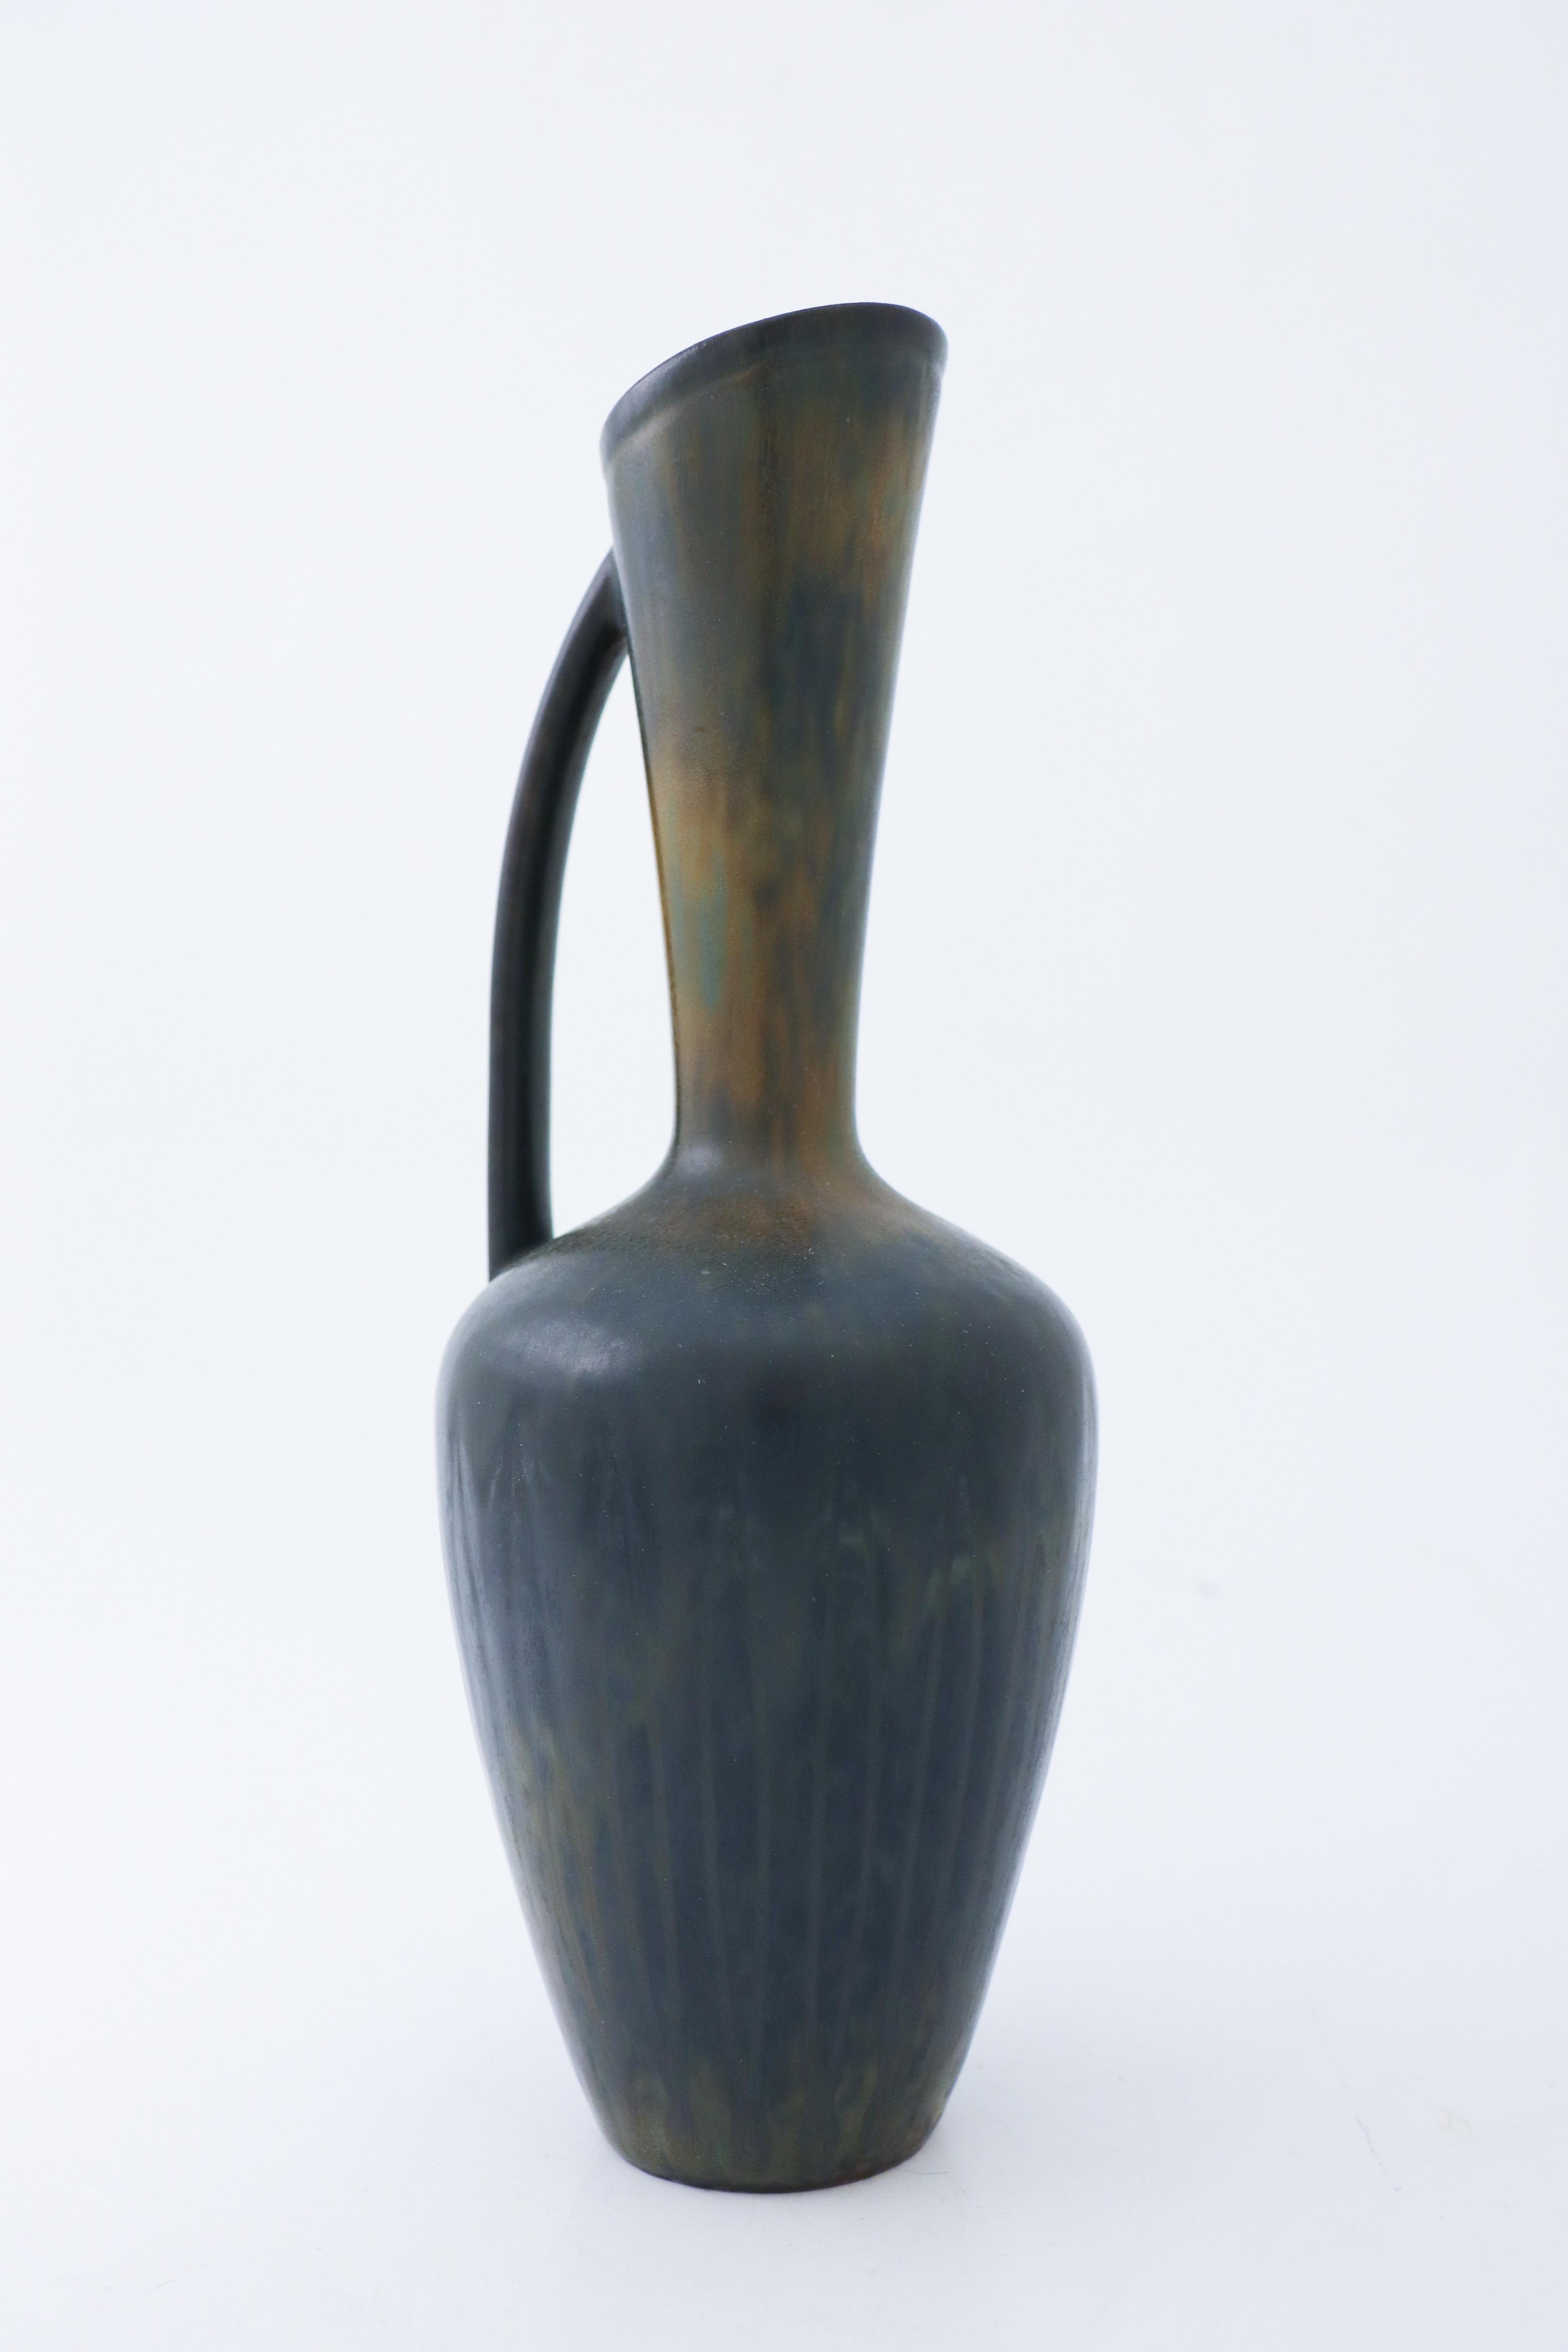 A vase with a handle designed by Gunnar Nylund at Rörstrand. The vase has a lovely black and green color. It is 27.5 cm high and in very good condition. The vase is marked as 2nd quality, I cannot see why. 

